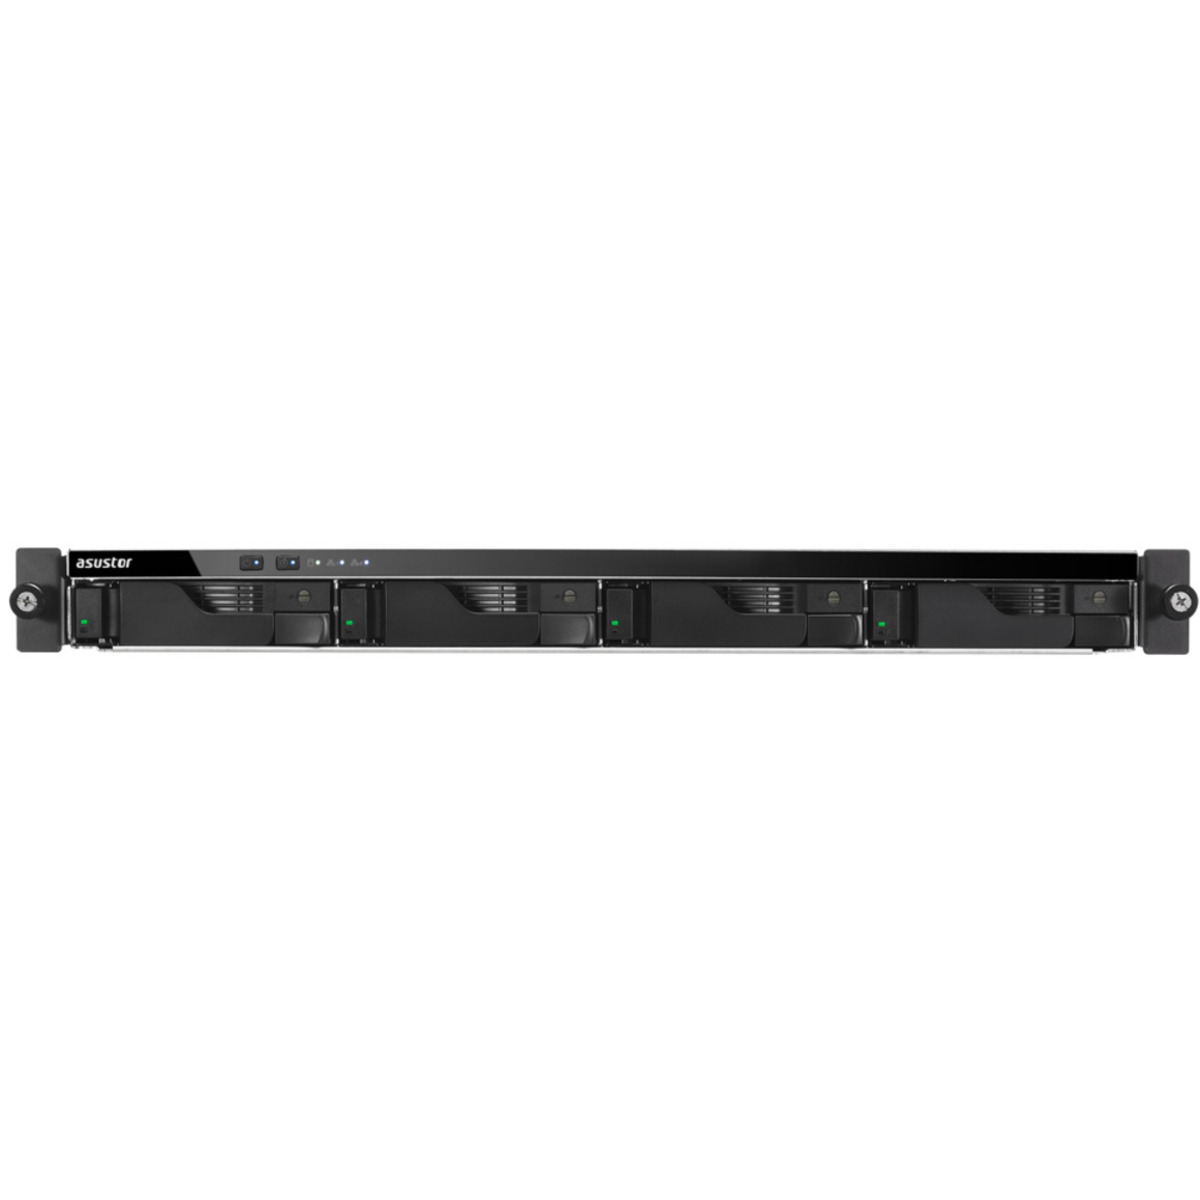 ASUSTOR LOCKERSTOR 4RD AS6504RD 8tb 4-Bay RackMount Multimedia / Power User / Business NAS - Network Attached Storage Device 4x2tb Western Digital Red Plus WD20EFZX 3.5 5400rpm SATA 6Gb/s HDD NAS Class Drives Installed - Burn-In Tested - FREE RAM UPGRADE LOCKERSTOR 4RD AS6504RD